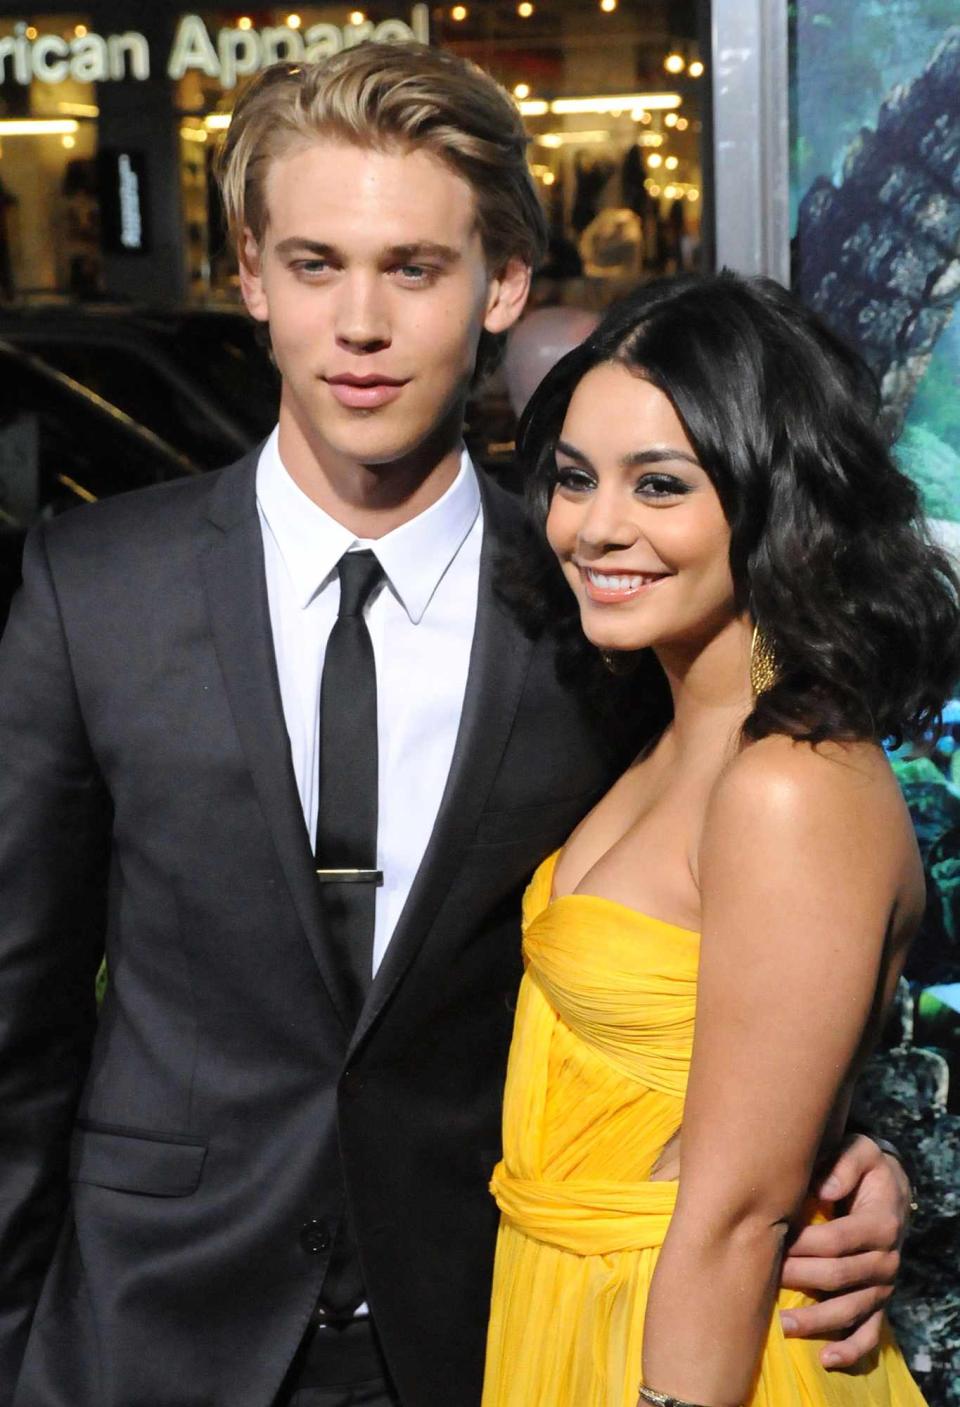 Austin Butler and actress Vanessa Hudgens arrive at the Los Angeles Premiere 'Journey 2: The Mysterious Island' at Grauman's Chinese Theatre on February 2, 2012 in Hollywood, California